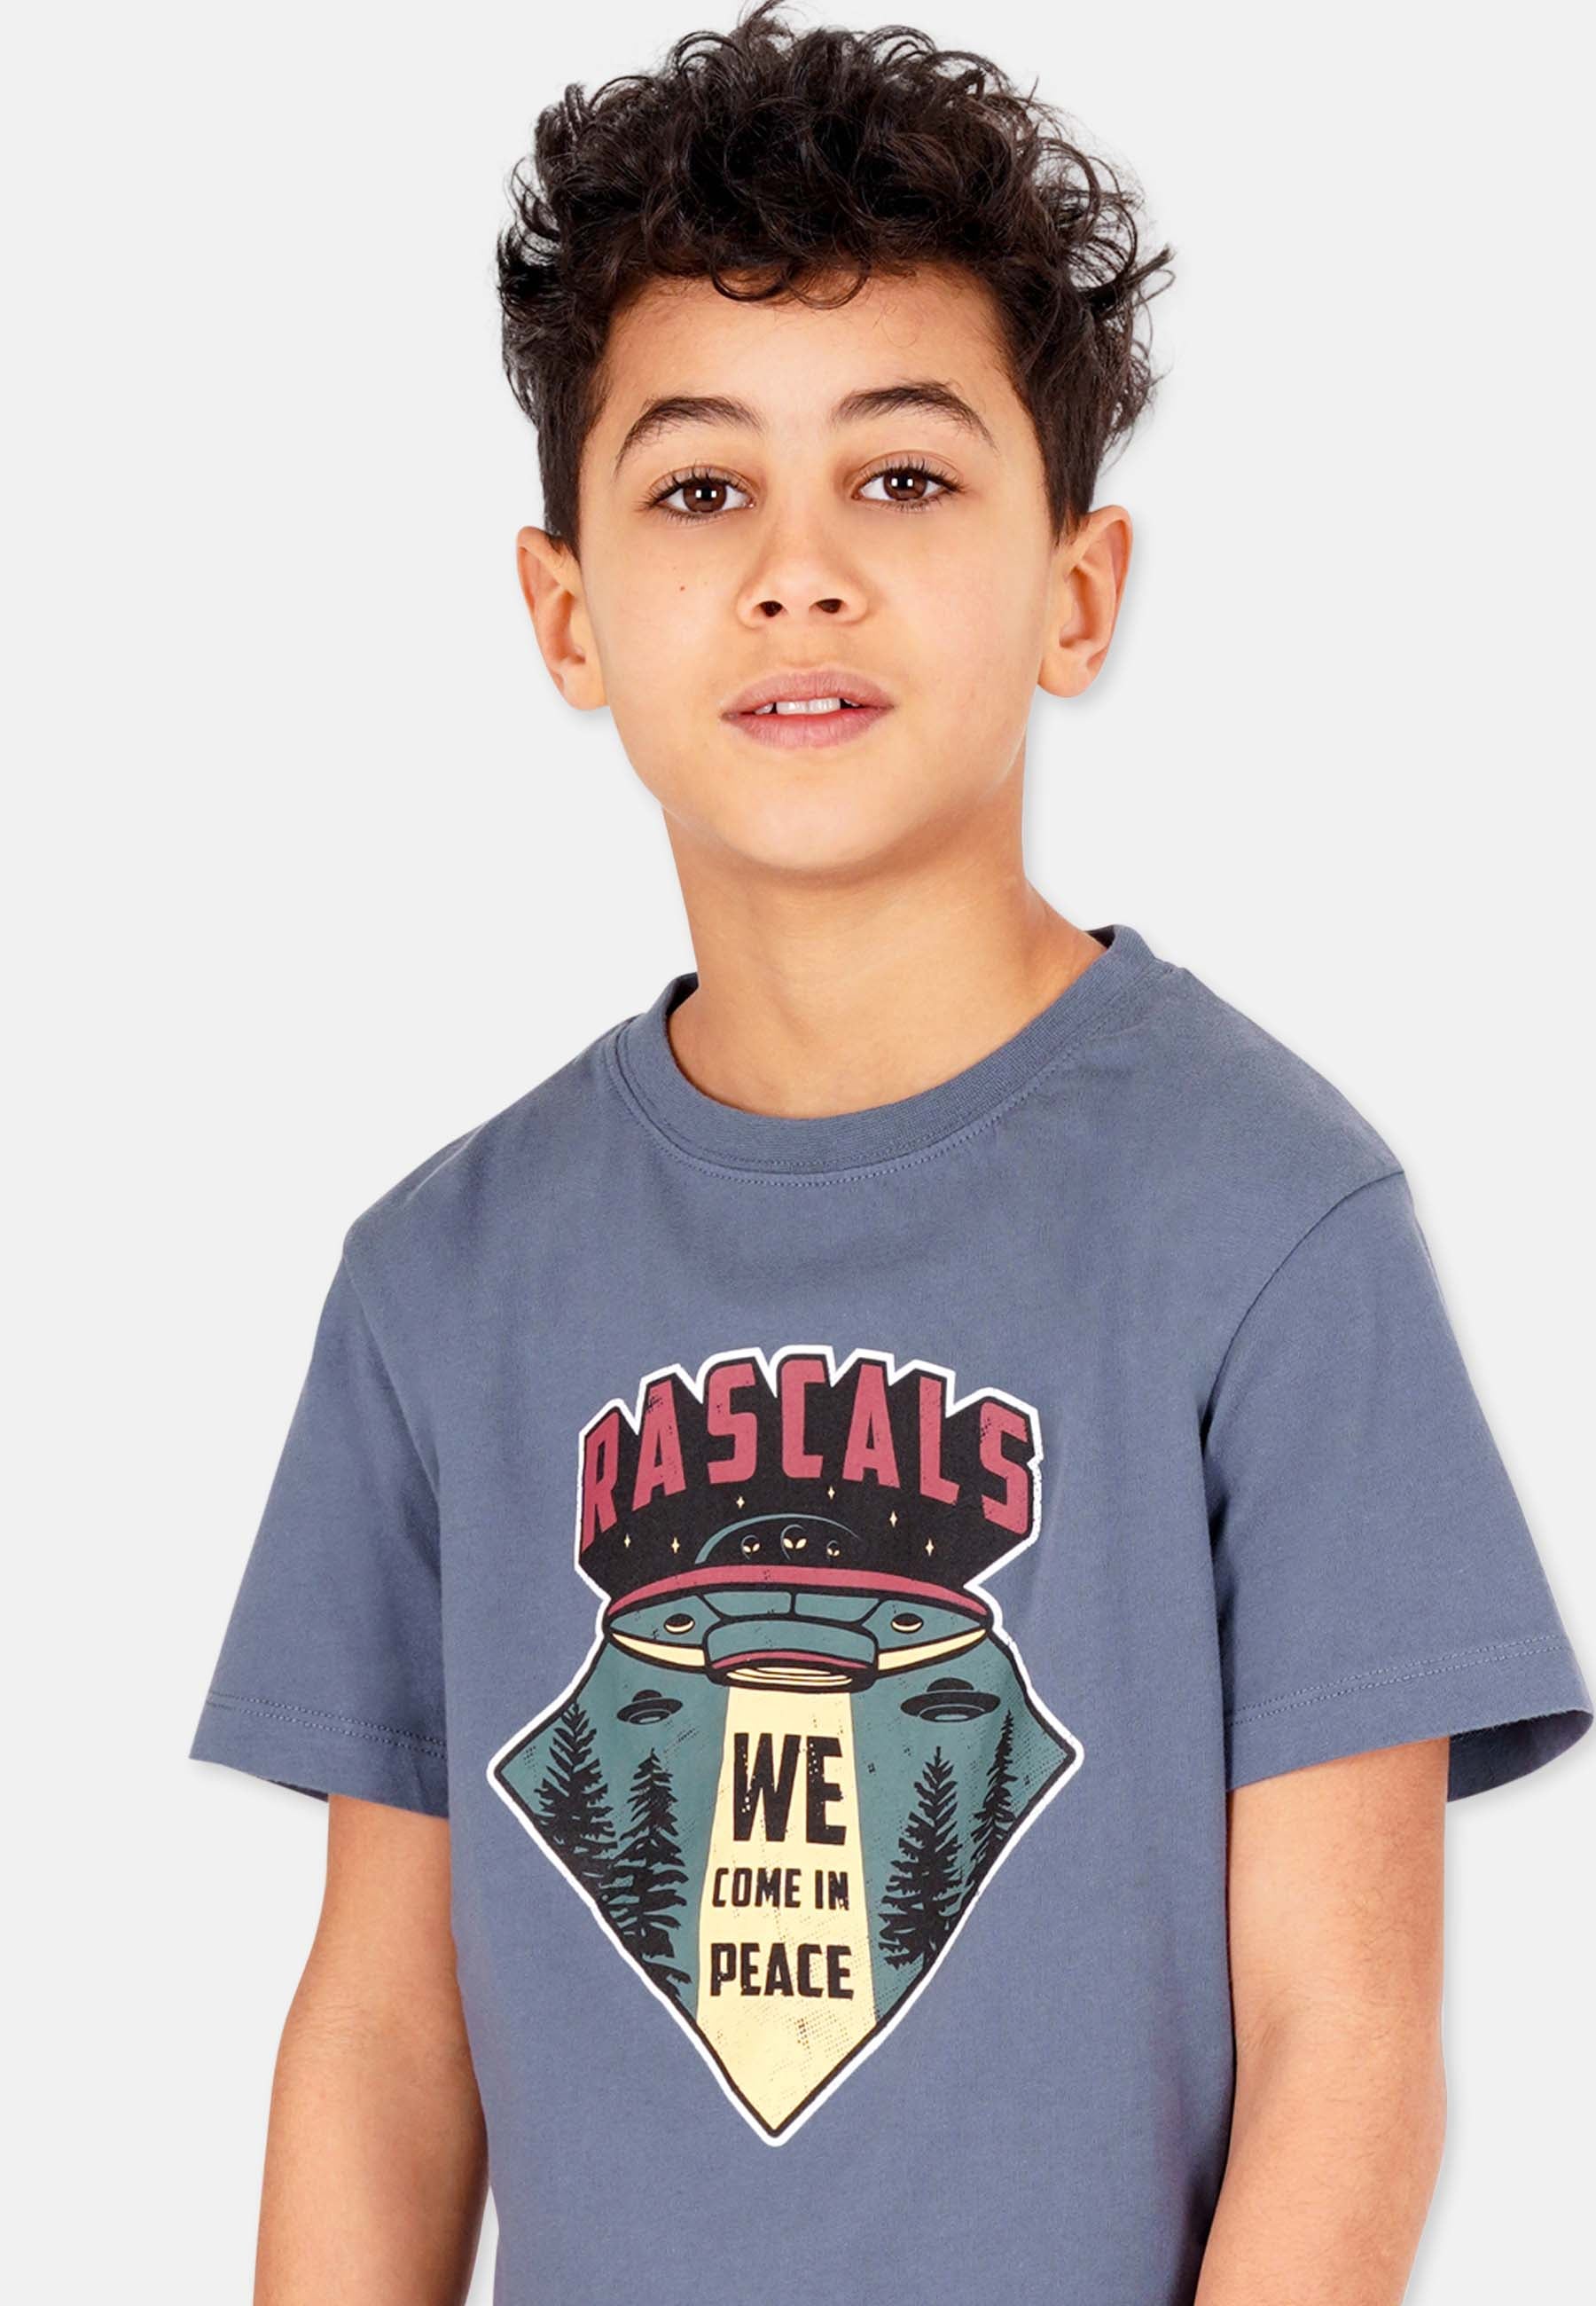 We Come In Peace T-Shirt